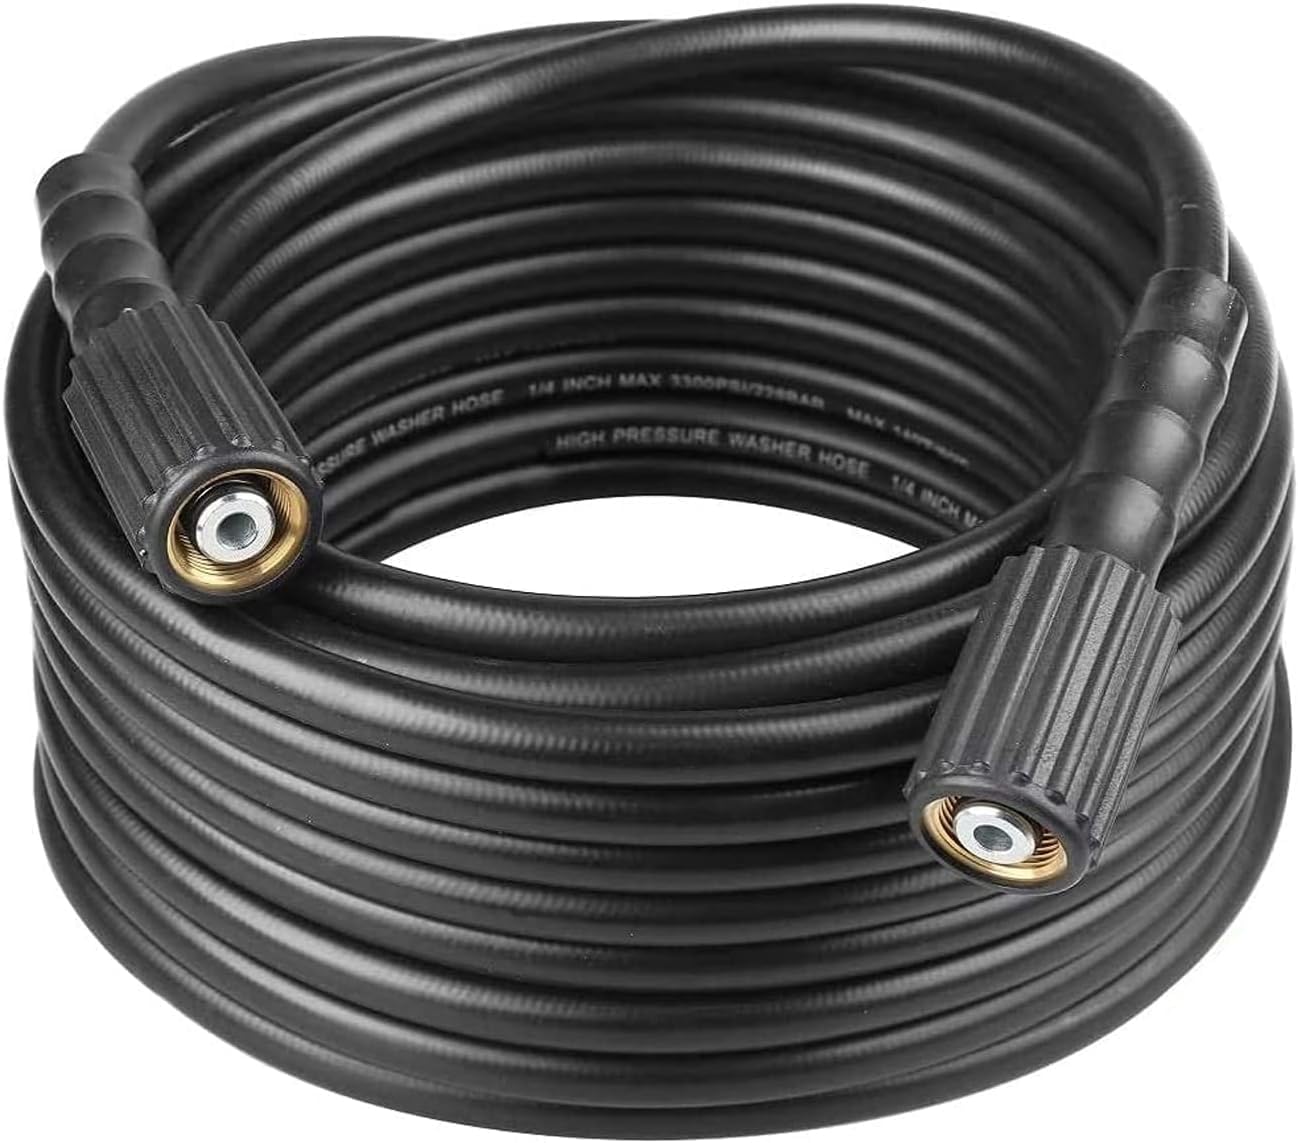 Power Washer Hose Review